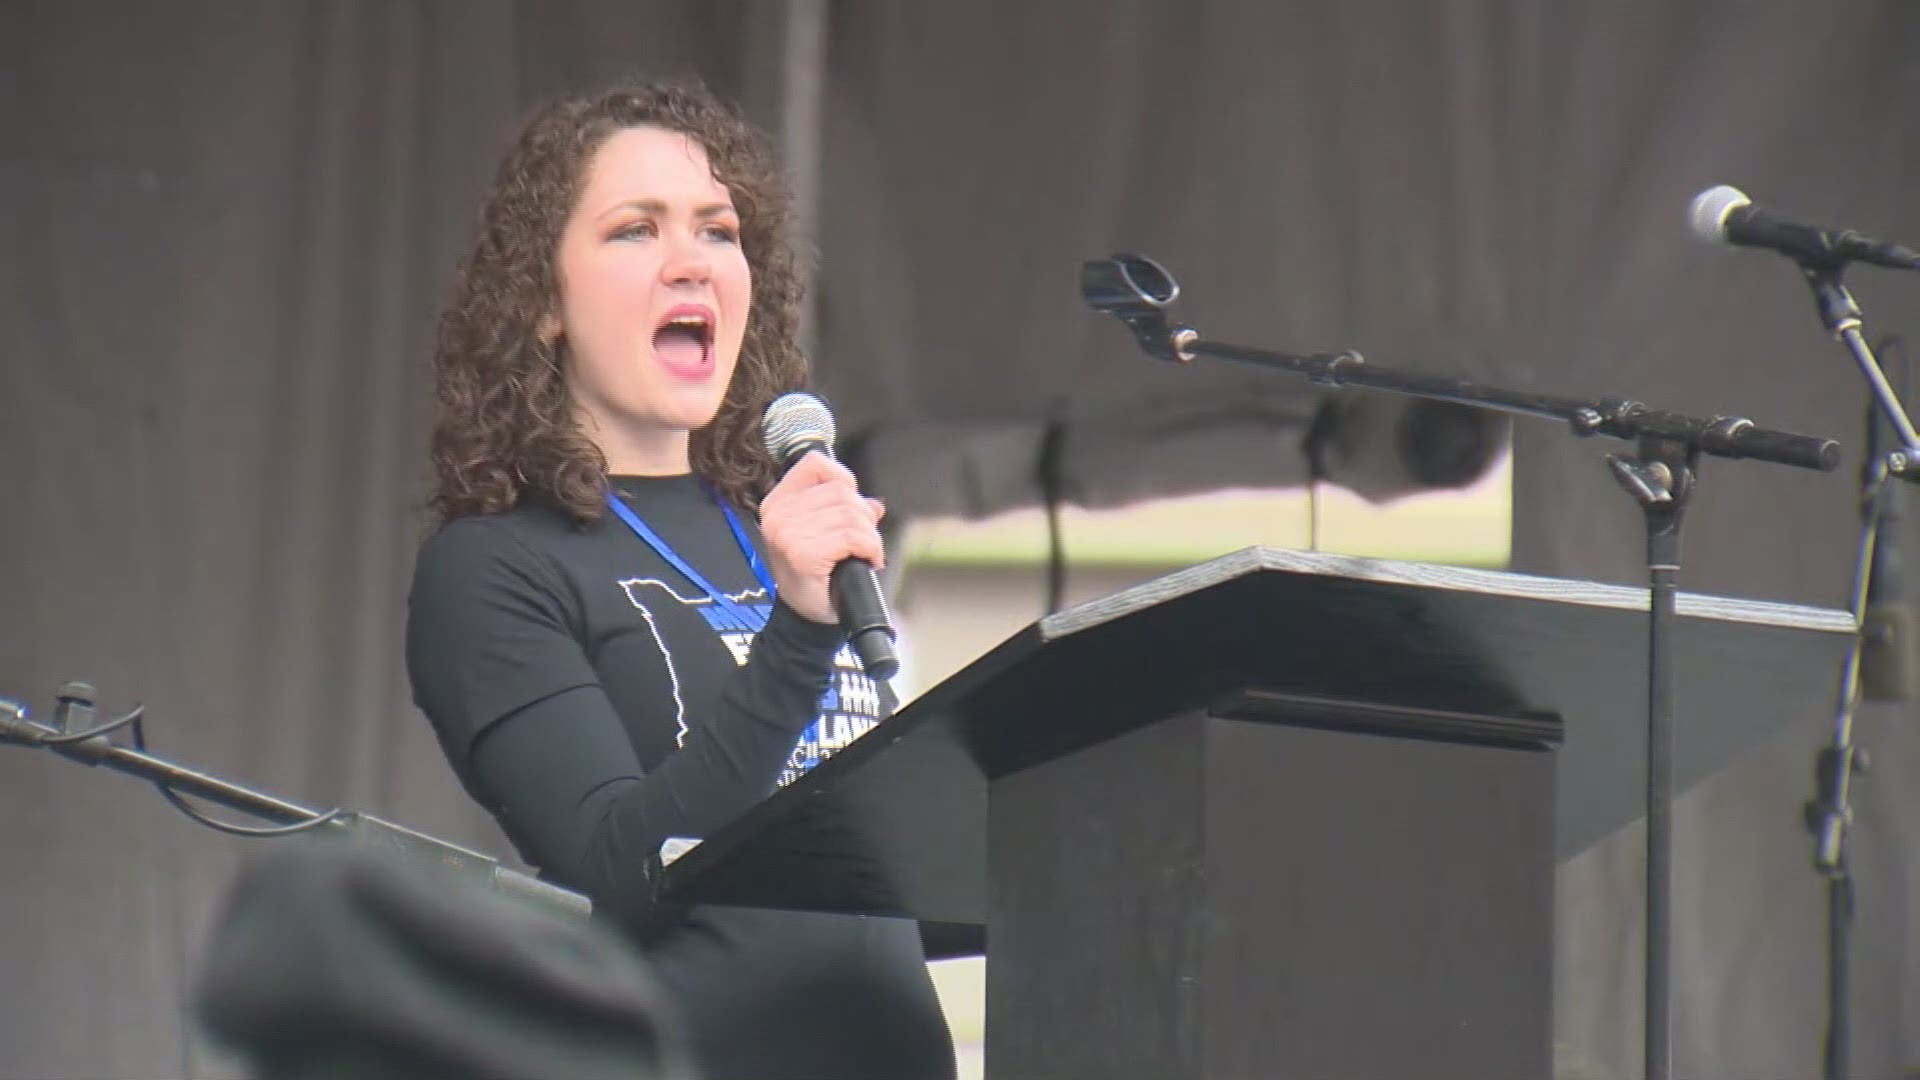 March for Our Lives PDX organizer Alexandria Goddard from Sunset High School delivers an impassioned speech.